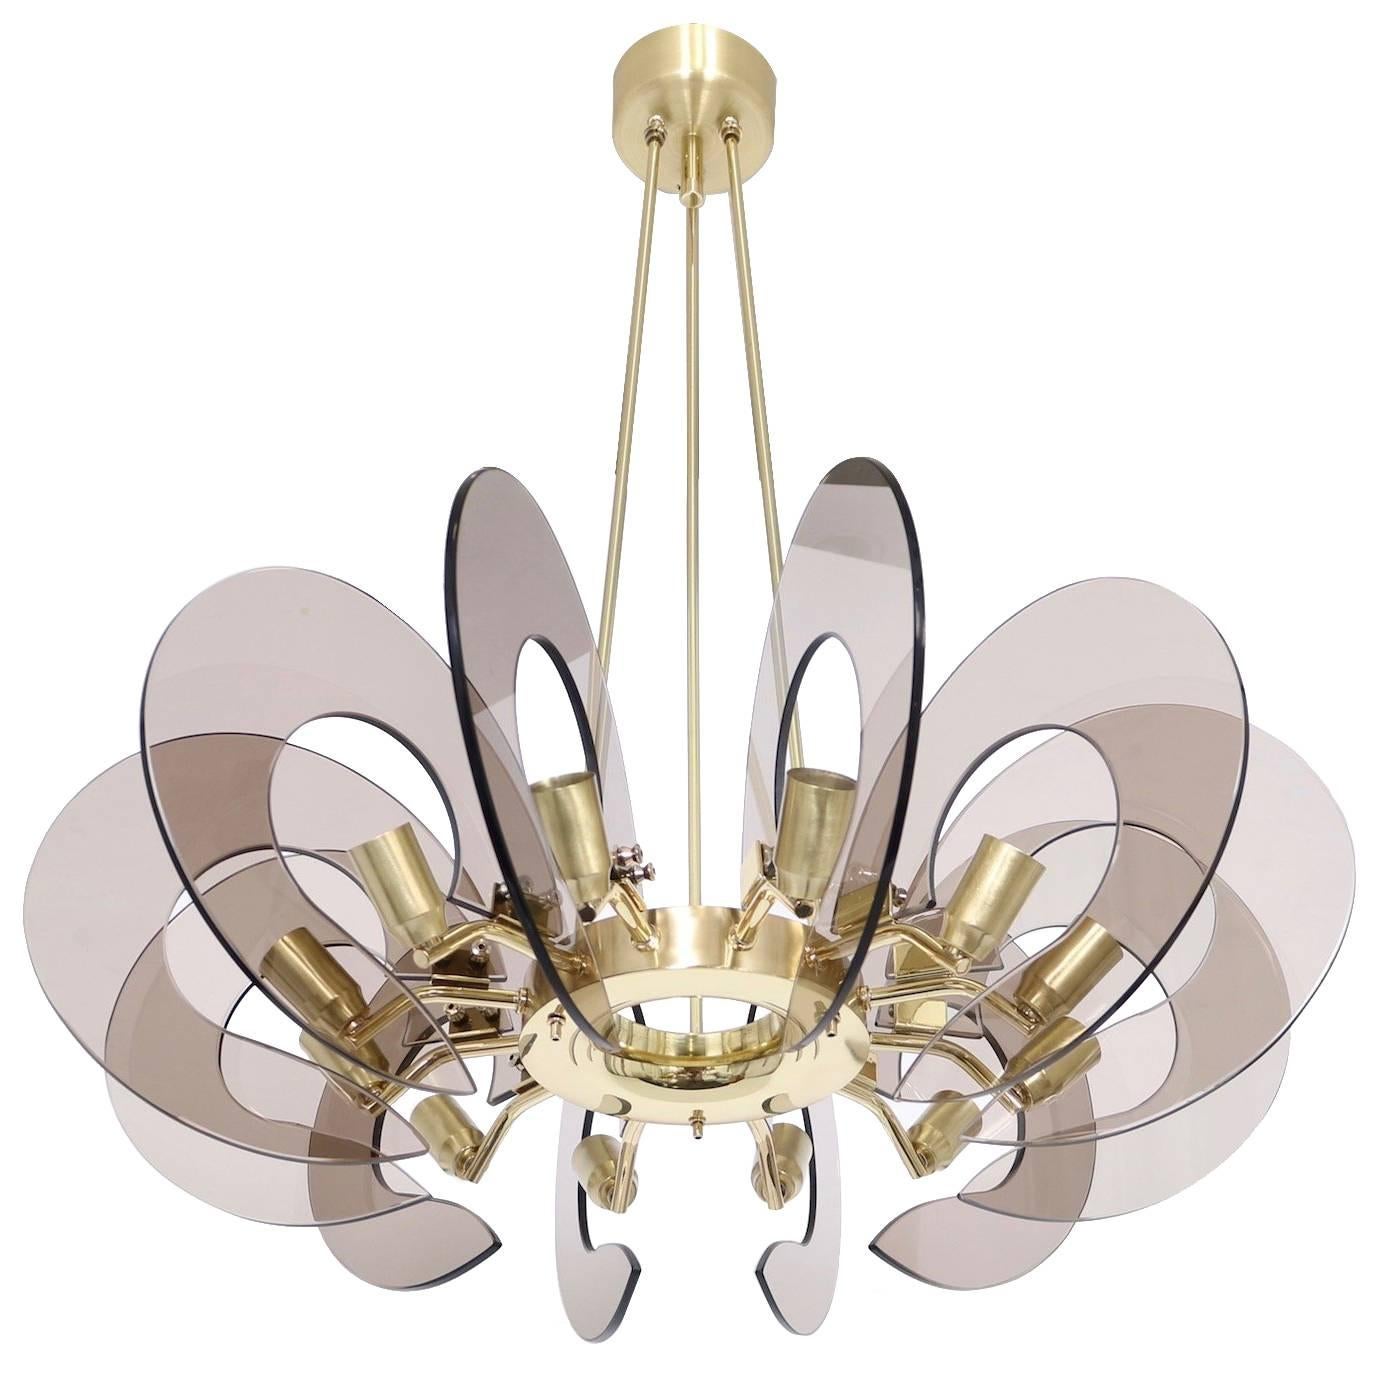 Restored Italian Chandelier in Brass and Smoked Glass Attributed to Fontana Arte